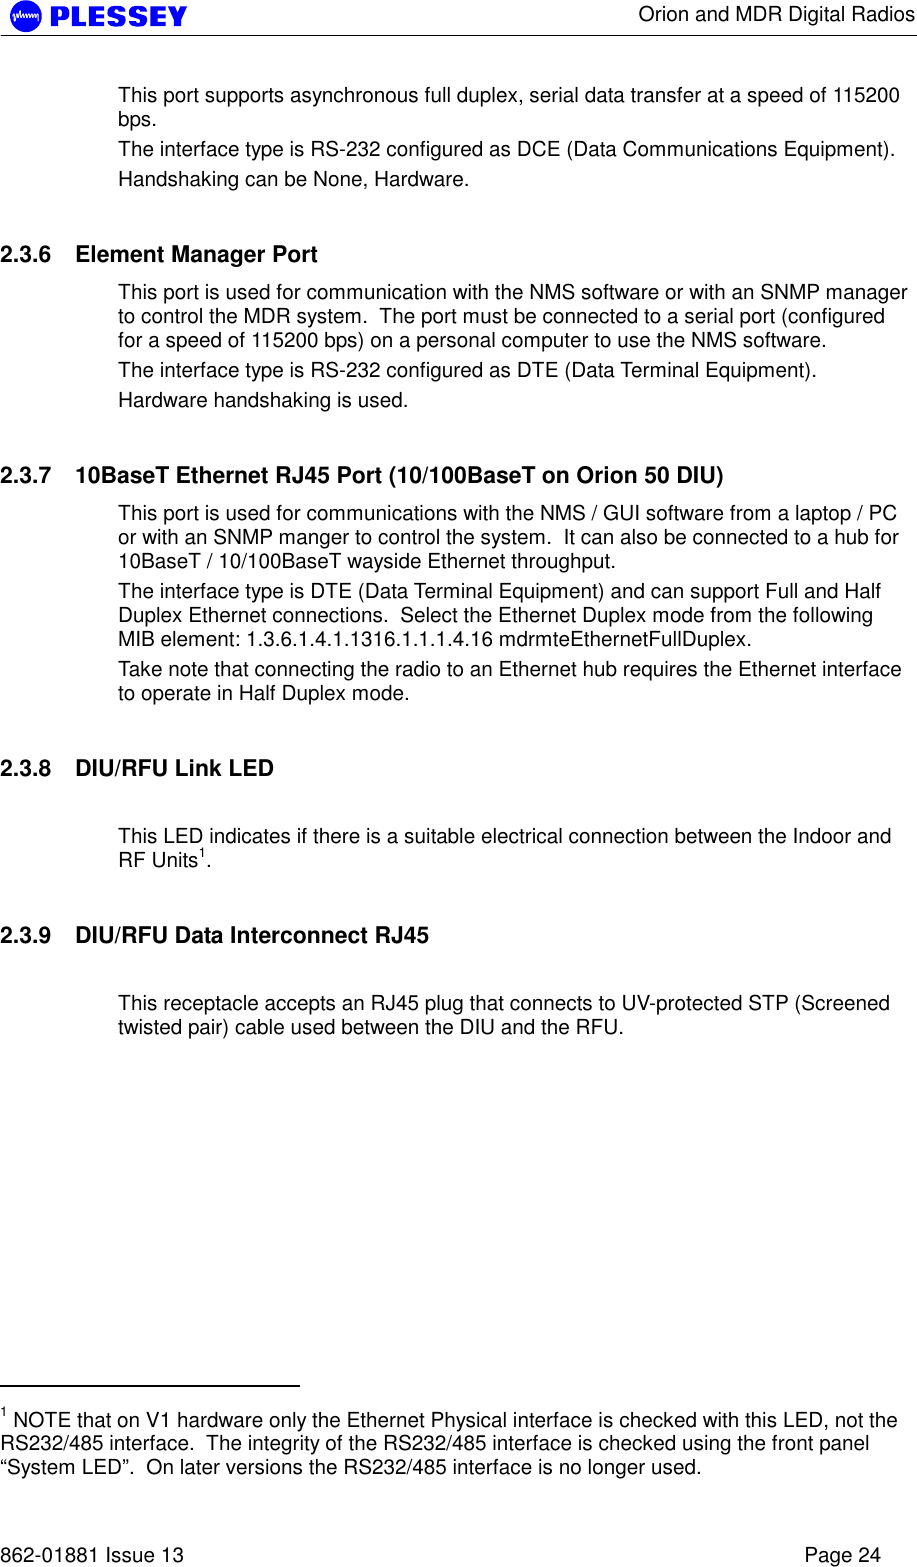      Orion and MDR Digital Radios   862-01881 Issue 13    Page 24 This port supports asynchronous full duplex, serial data transfer at a speed of 115200 bps.  The interface type is RS-232 configured as DCE (Data Communications Equipment). Handshaking can be None, Hardware. 2.3.6  Element Manager Port This port is used for communication with the NMS software or with an SNMP manager to control the MDR system.  The port must be connected to a serial port (configured for a speed of 115200 bps) on a personal computer to use the NMS software. The interface type is RS-232 configured as DTE (Data Terminal Equipment).  Hardware handshaking is used. 2.3.7  10BaseT Ethernet RJ45 Port (10/100BaseT on Orion 50 DIU) This port is used for communications with the NMS / GUI software from a laptop / PC or with an SNMP manger to control the system.  It can also be connected to a hub for 10BaseT / 10/100BaseT wayside Ethernet throughput.  The interface type is DTE (Data Terminal Equipment) and can support Full and Half Duplex Ethernet connections.  Select the Ethernet Duplex mode from the following MIB element: 1.3.6.1.4.1.1316.1.1.1.4.16 mdrmteEthernetFullDuplex. Take note that connecting the radio to an Ethernet hub requires the Ethernet interface to operate in Half Duplex mode. 2.3.8  DIU/RFU Link LED  This LED indicates if there is a suitable electrical connection between the Indoor and RF Units1. 2.3.9  DIU/RFU Data Interconnect RJ45  This receptacle accepts an RJ45 plug that connects to UV-protected STP (Screened twisted pair) cable used between the DIU and the RFU.                                             1 NOTE that on V1 hardware only the Ethernet Physical interface is checked with this LED, not the RS232/485 interface.  The integrity of the RS232/485 interface is checked using the front panel “System LED”.  On later versions the RS232/485 interface is no longer used. 